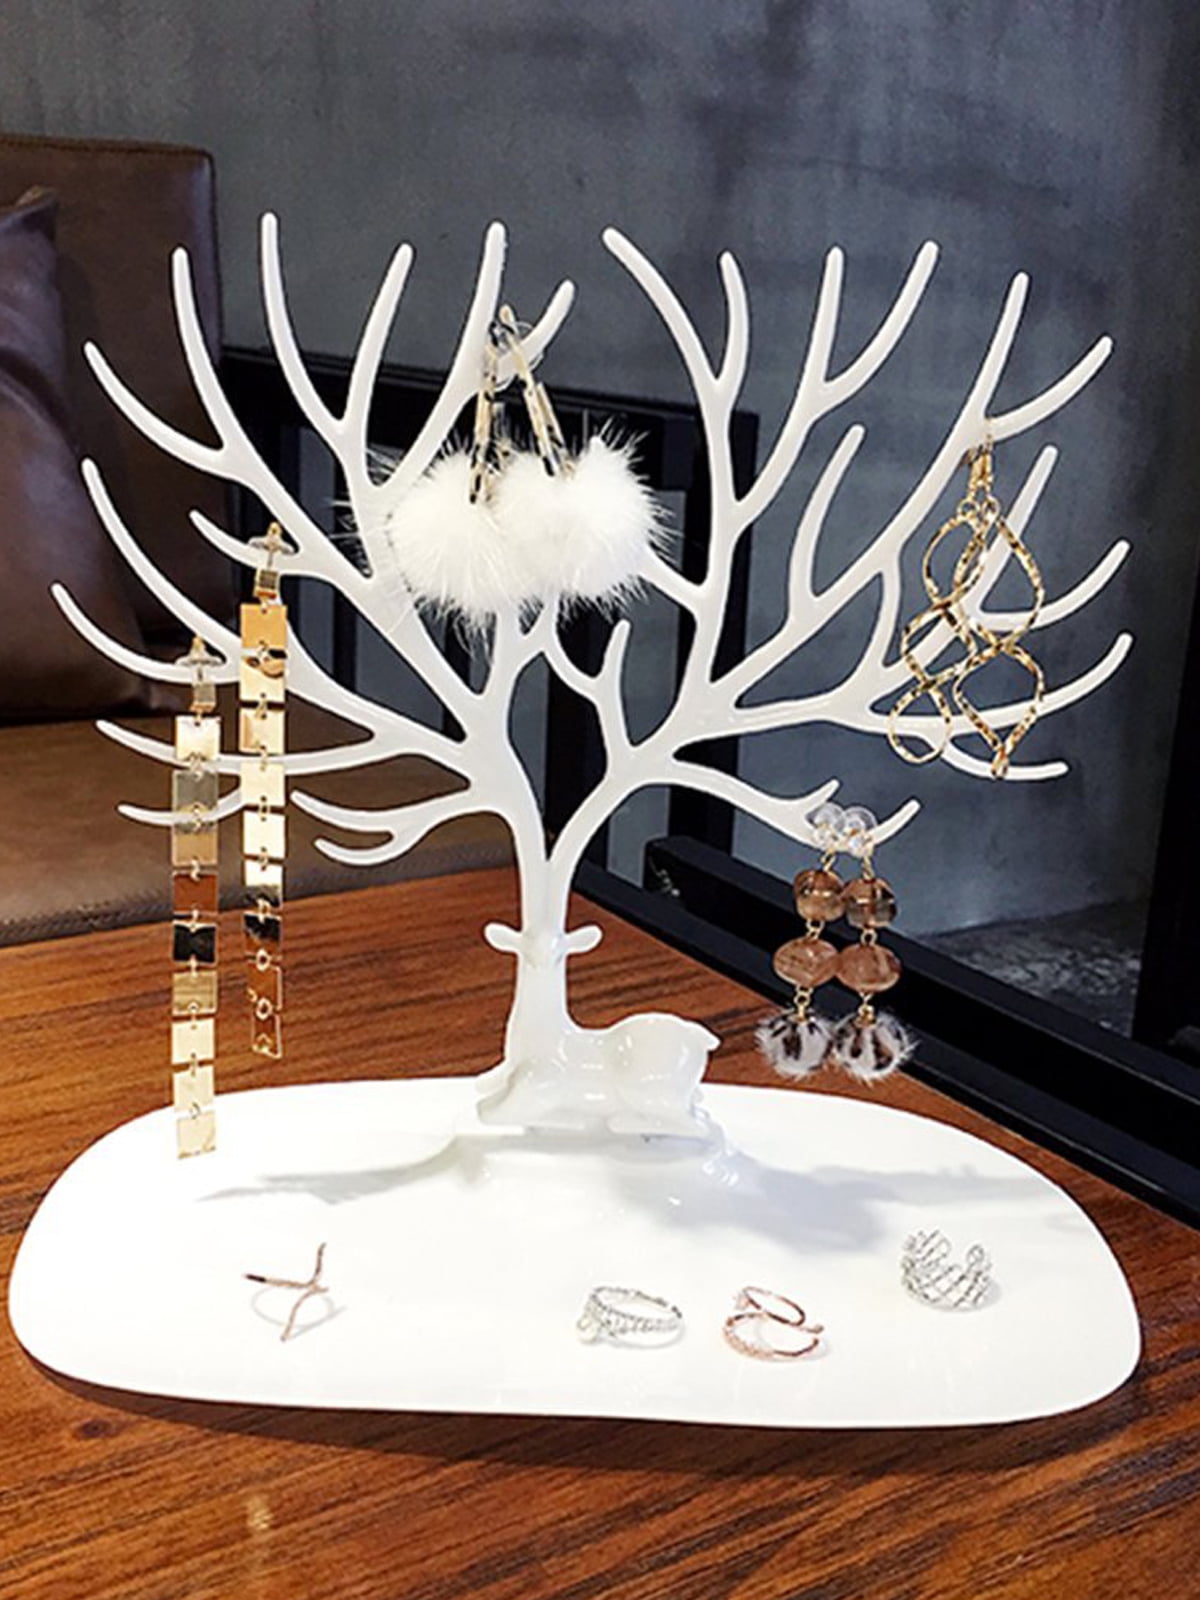 Details about   Jewelry Deer Tree Stand Display Show Rack Necklace Ring Earring Holder Organizer 